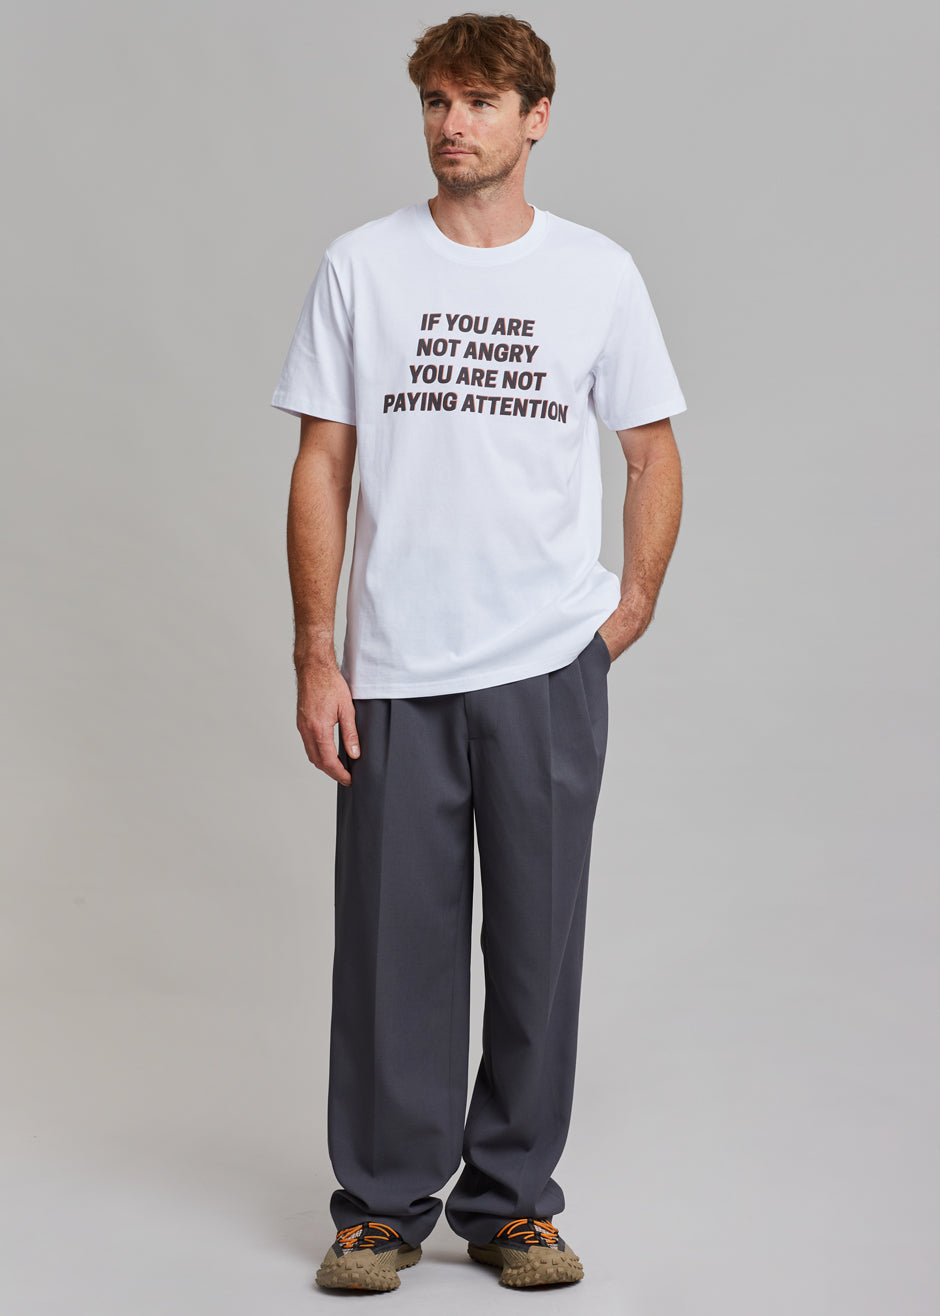 The Frankie Shop x Jeanne Friot If You T-Shirt - White/Black - 7